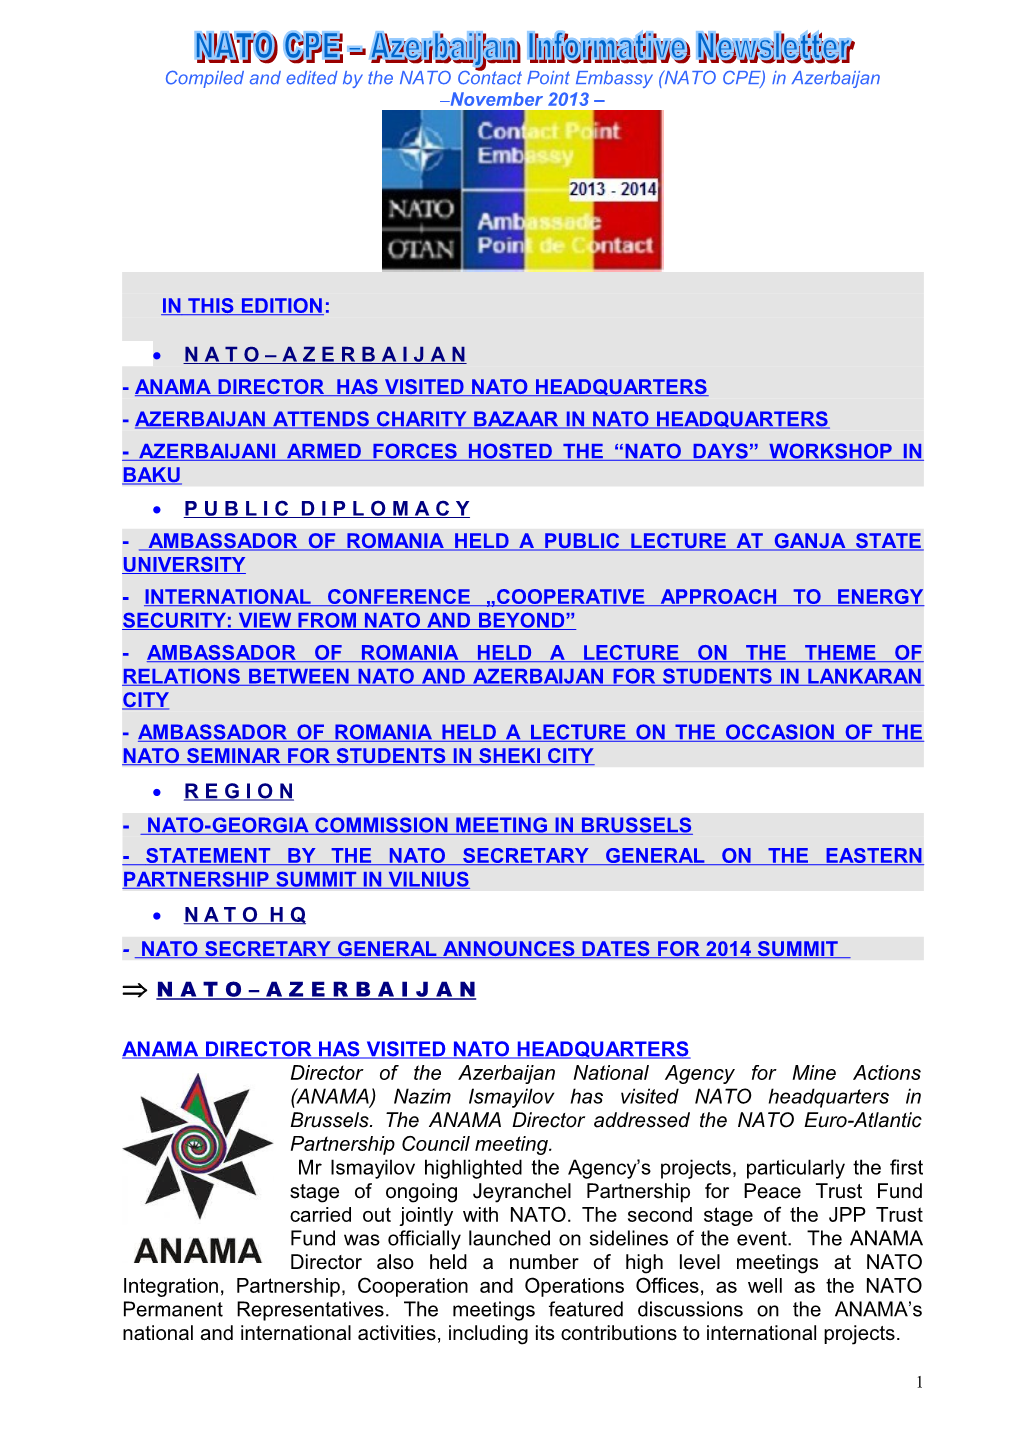 Compiled and Edited by the NATO Contact Point Embassy (NATO CPE) in Azerbaijan